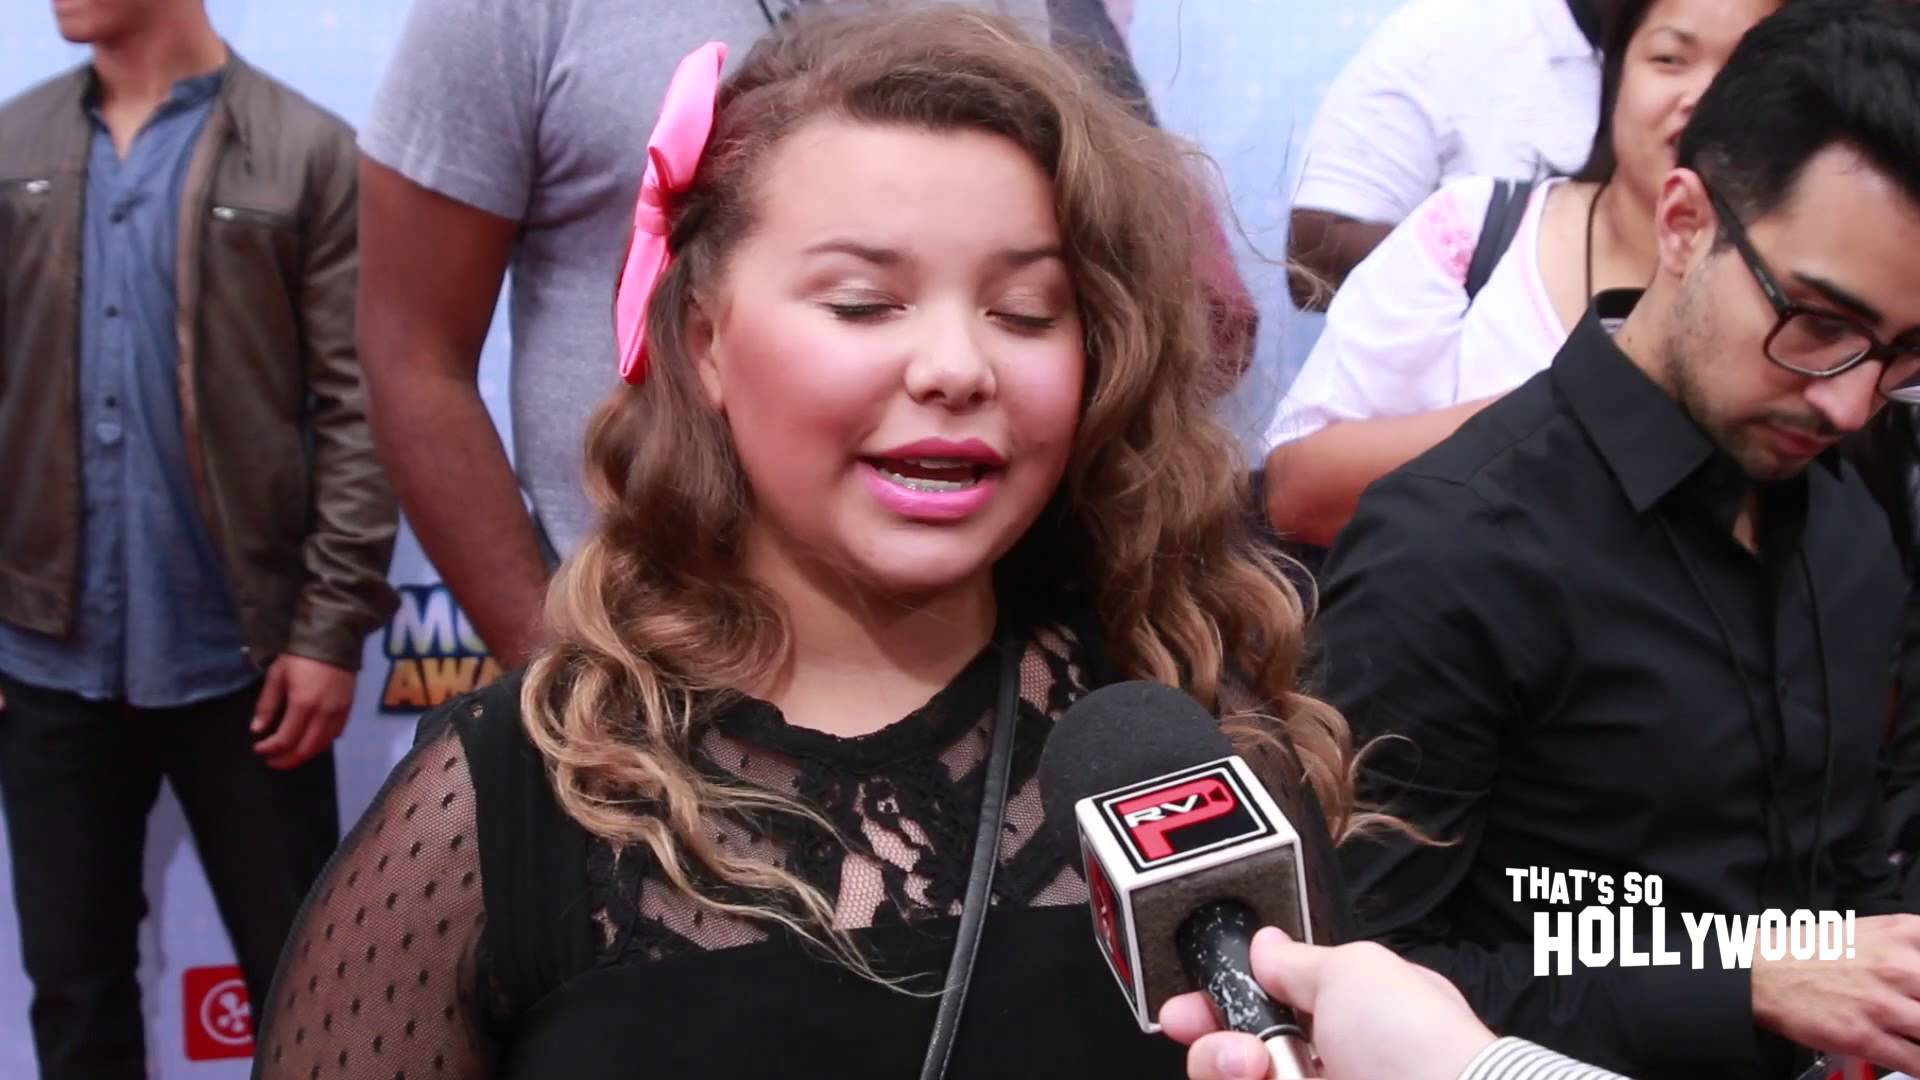 Aaliyah Rose excited to be back at the 2015 Radio Disney Music Awards